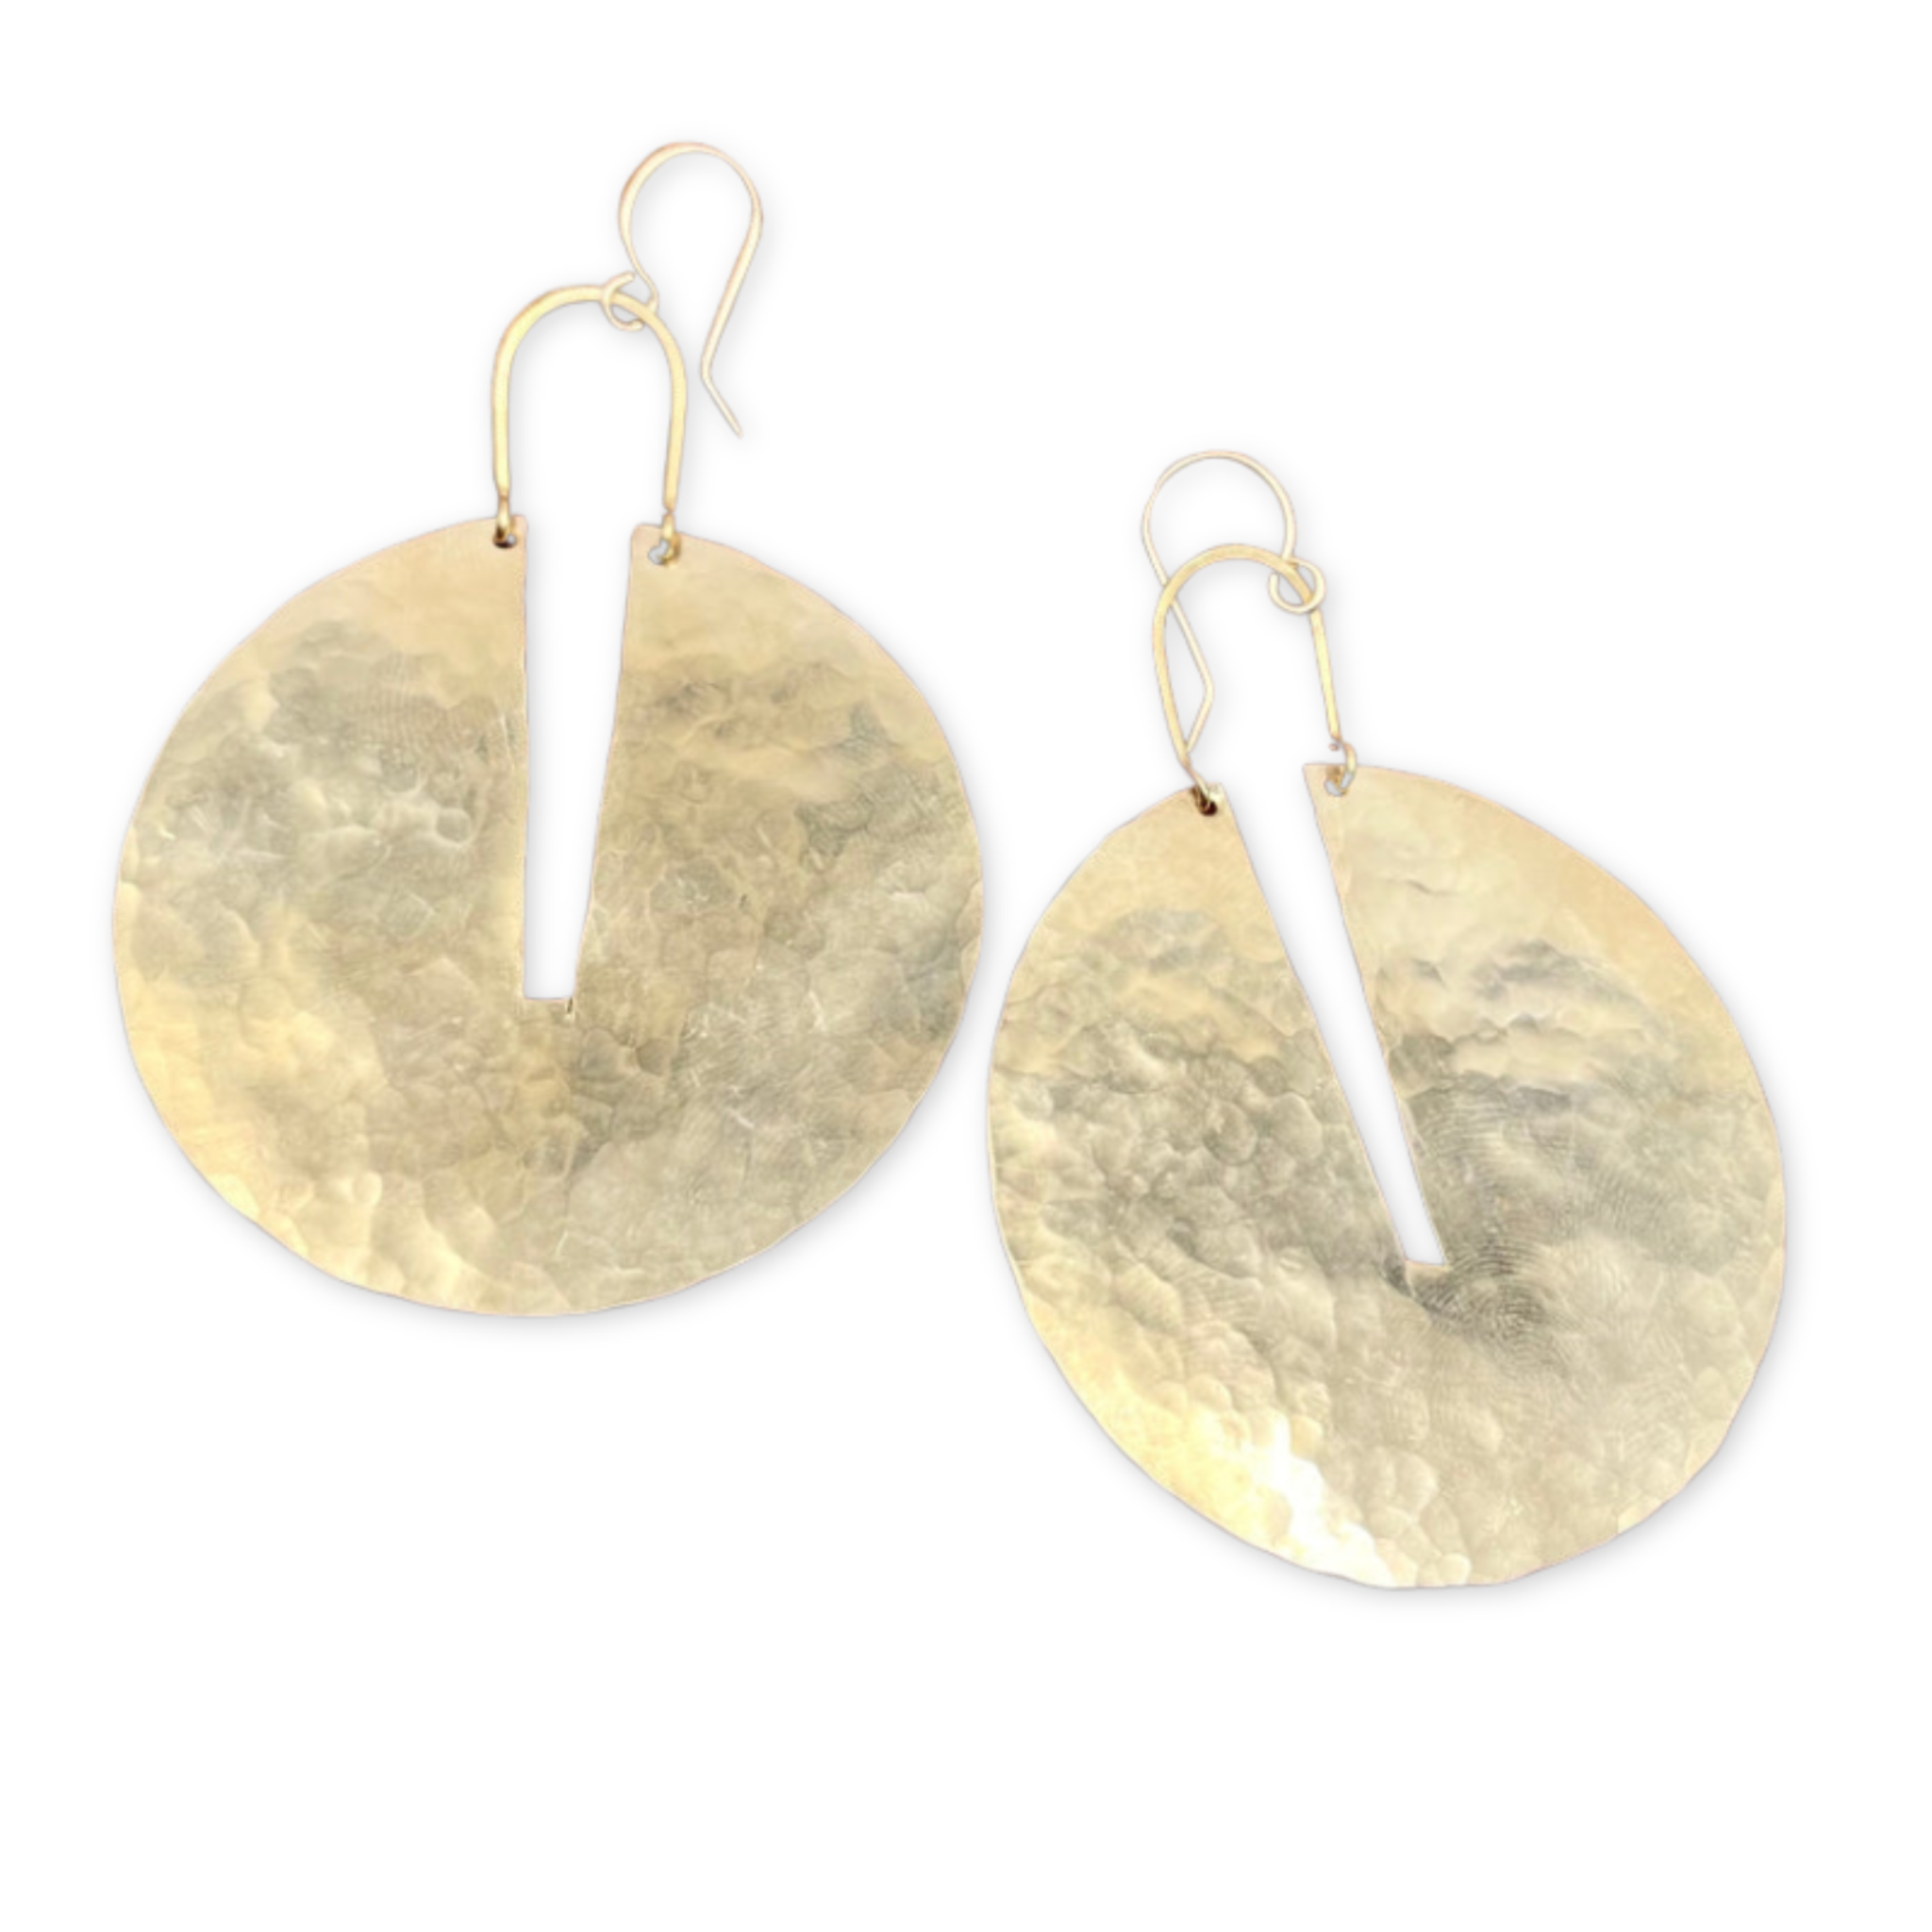 a pair of gold disc earrings with a slit